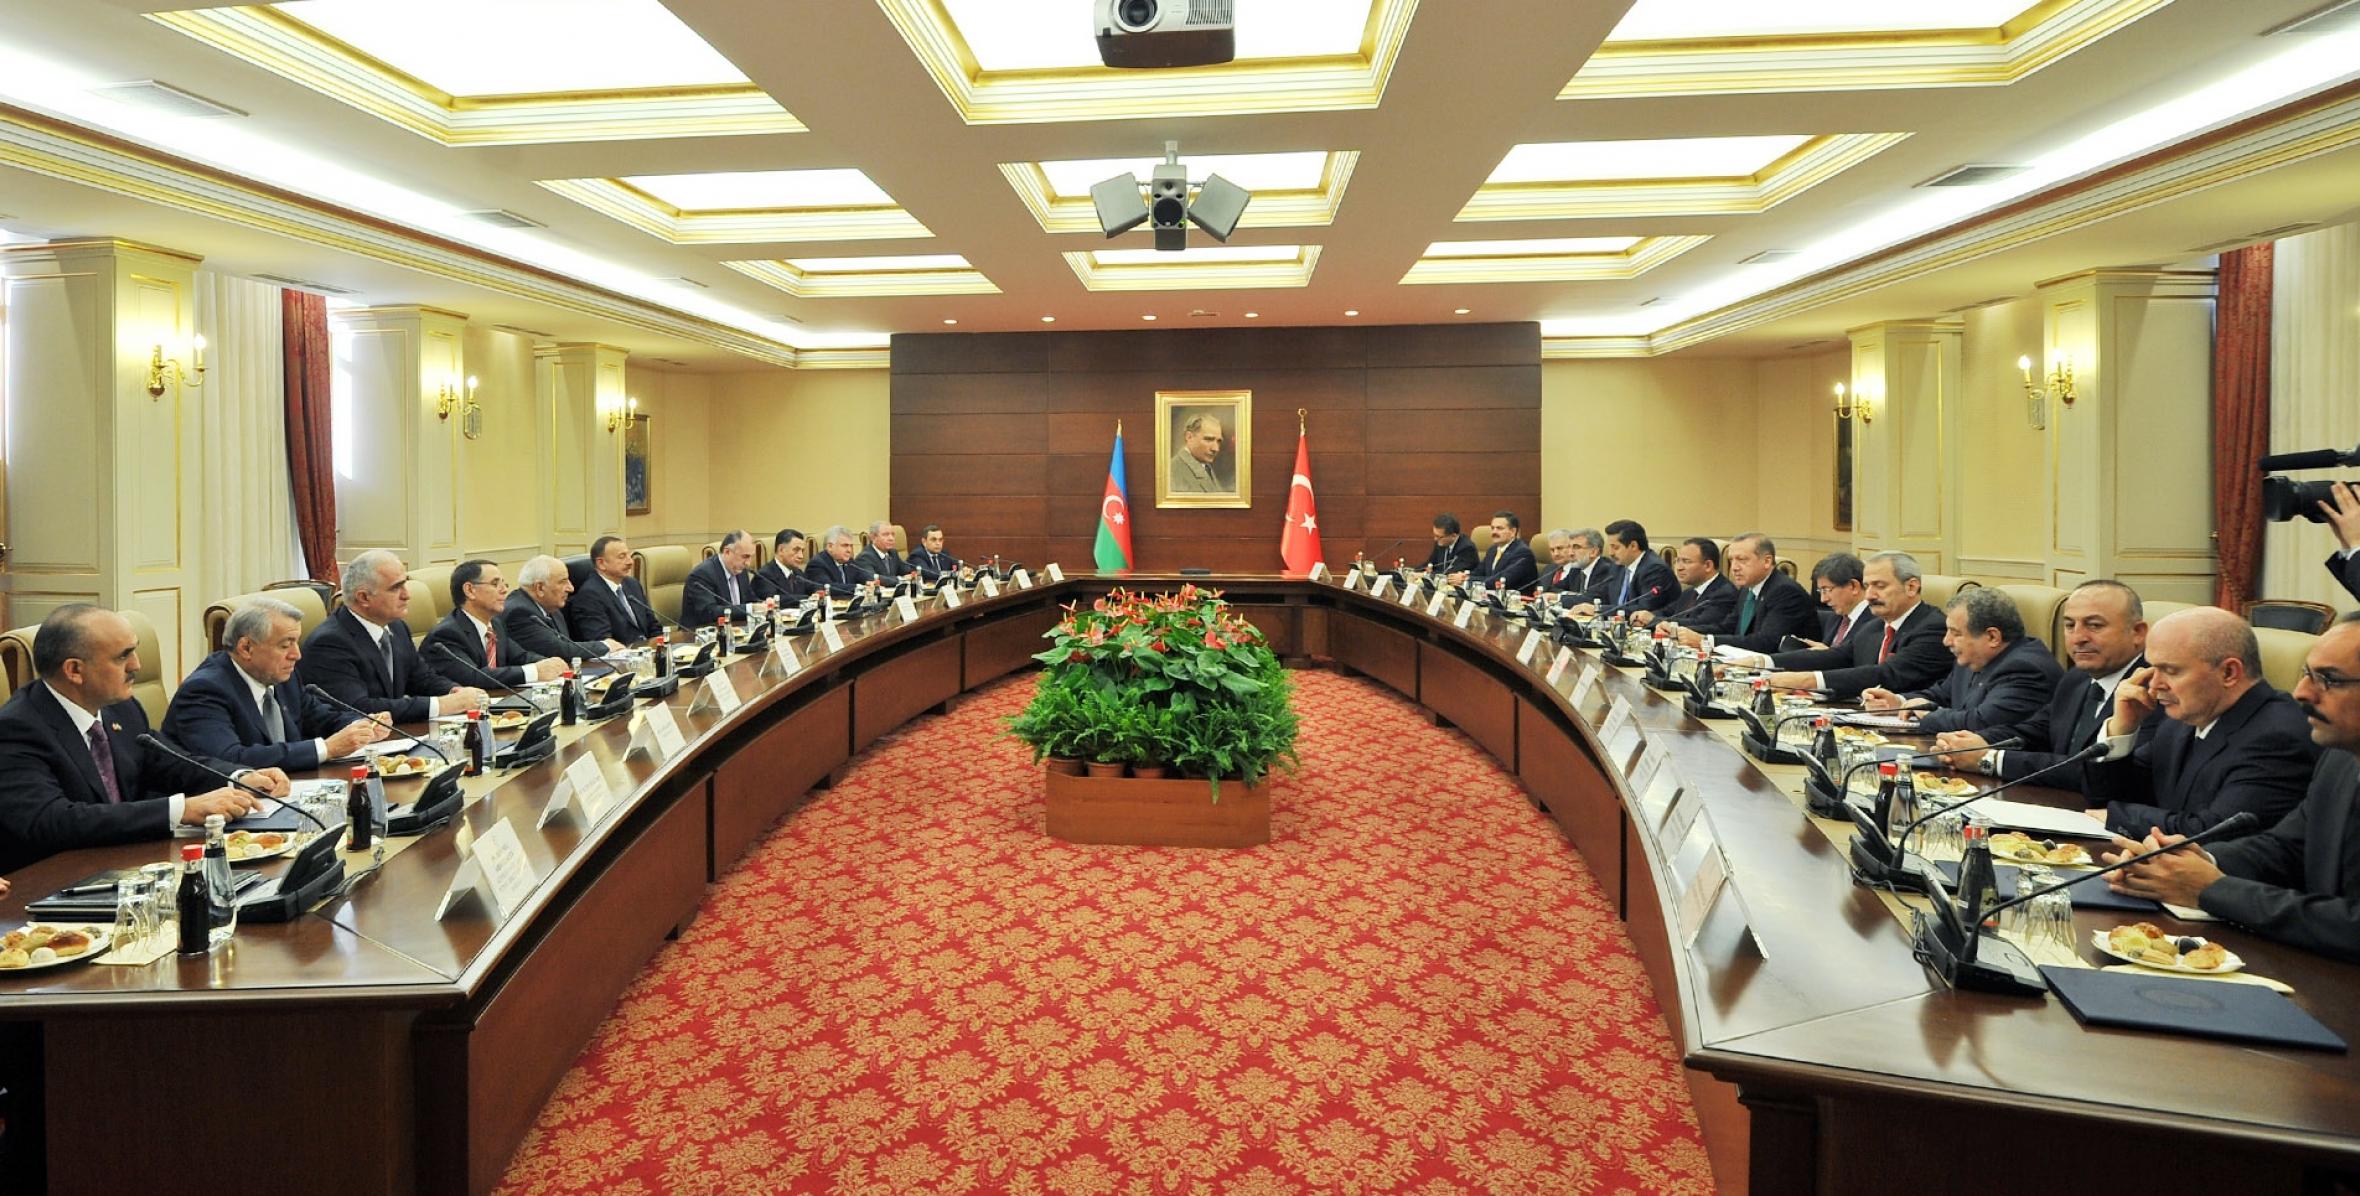 The third session of the Turkish-Azerbaijani High-Level Strategic Cooperation Council has been held